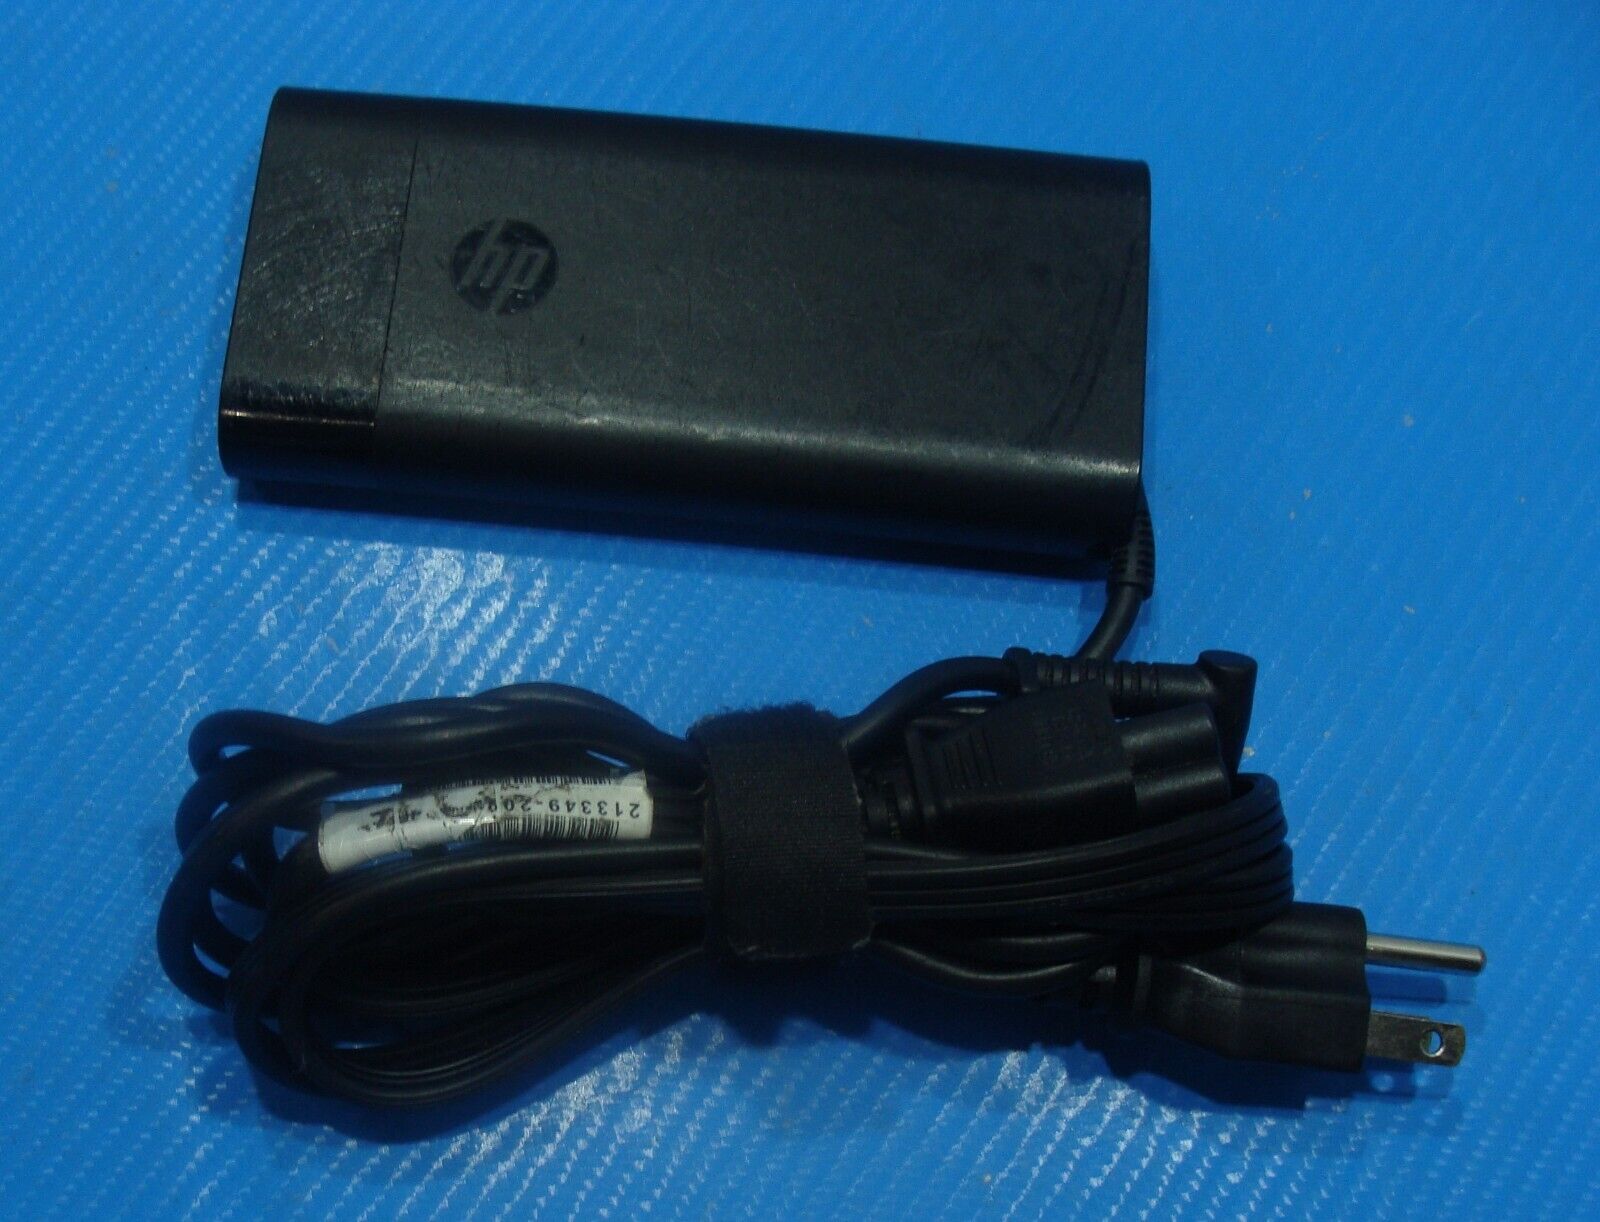 Genuine Sony PSP-100 Charger for Sony PSP 1001 2001 3001 100% OEM